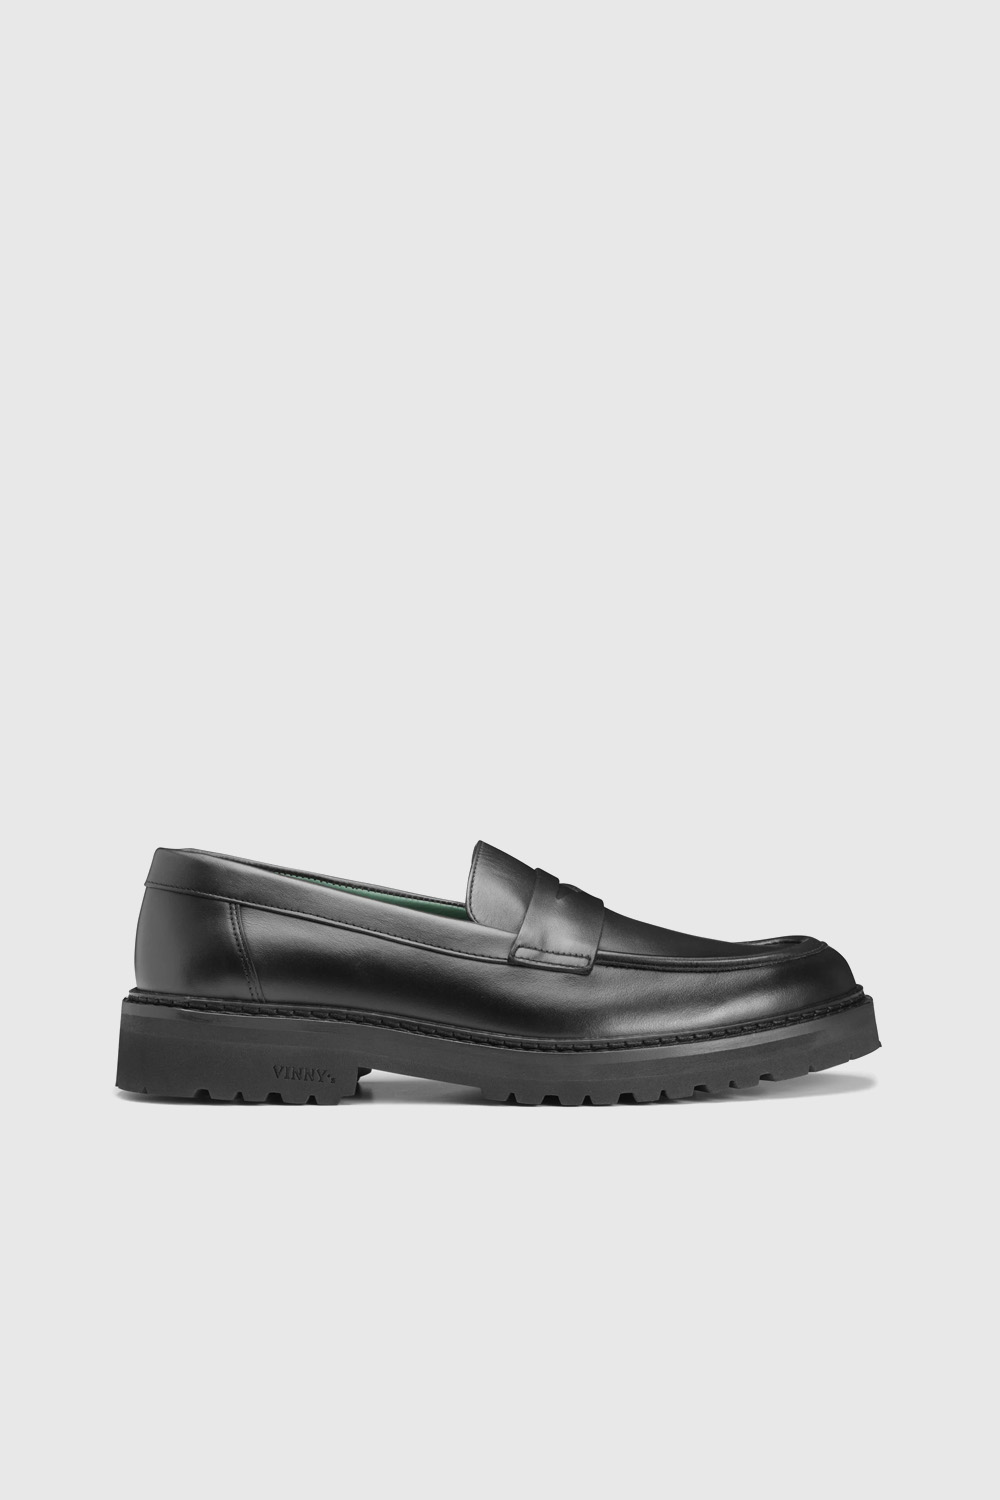 Vinny's Richee Penny Loafer Black crust leather | WoodWood.com